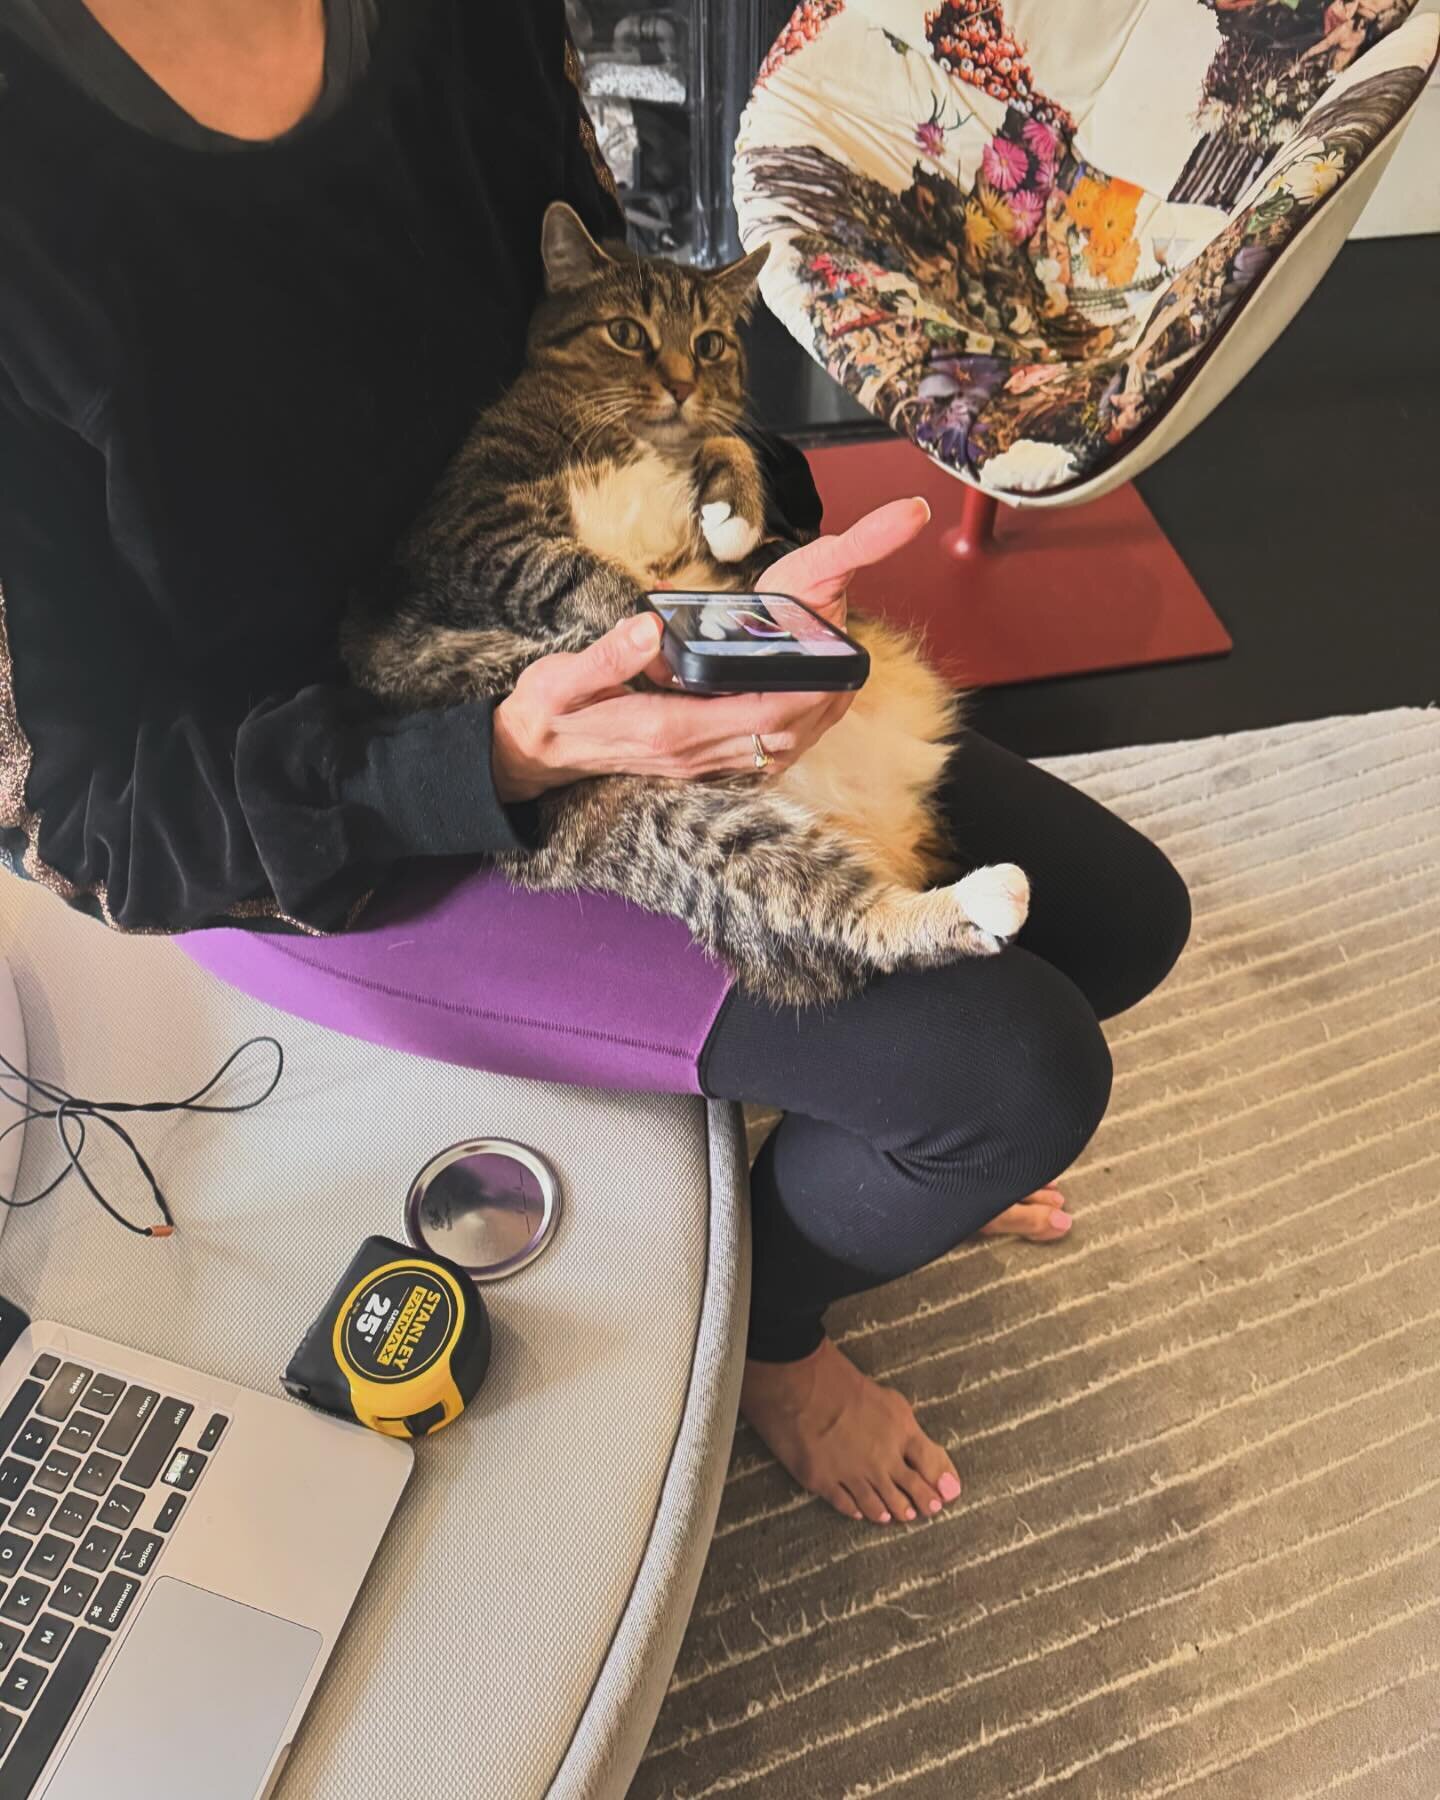 Jobsite visit this am! This made my Monday extra Happy today! 
Meet Milo, my client&rsquo;s 3 legged mush!!&bull;&bull;Of course, he needed to sit in on this meeting and be involved in our discussion about throw blankets. 😻

#designer #catsofinstagr